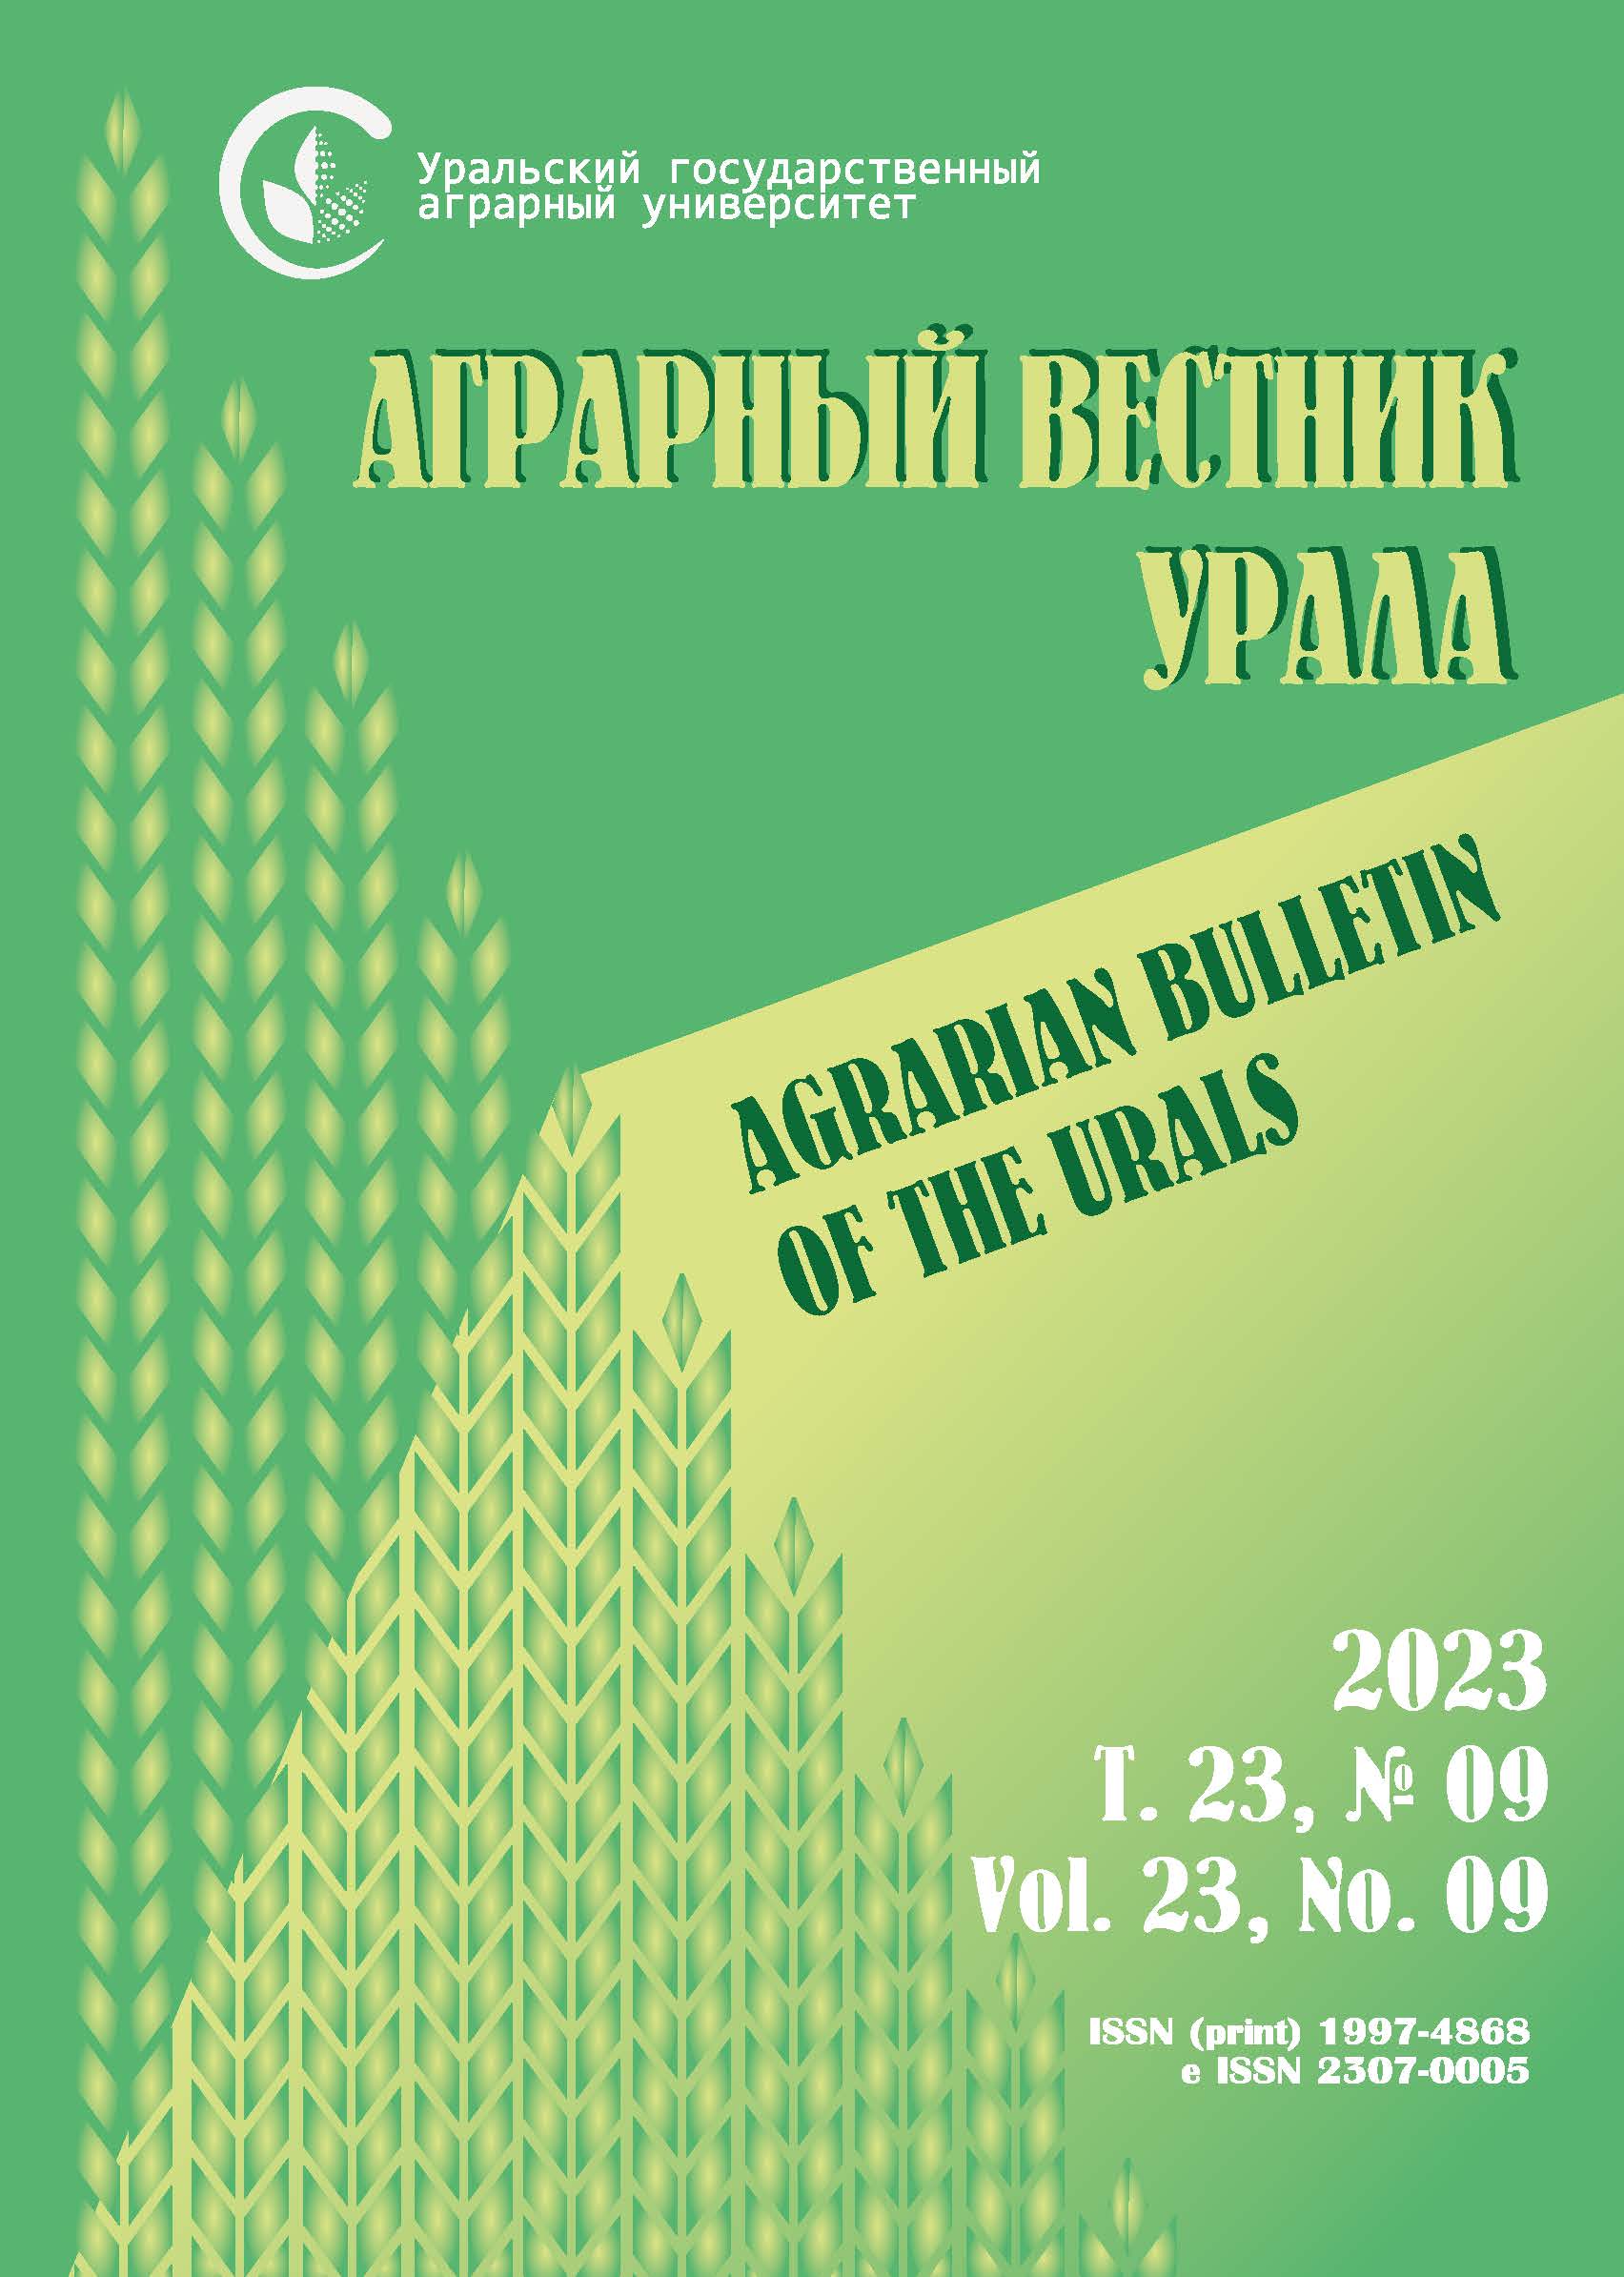                         Agrarian Bulletin of the
            